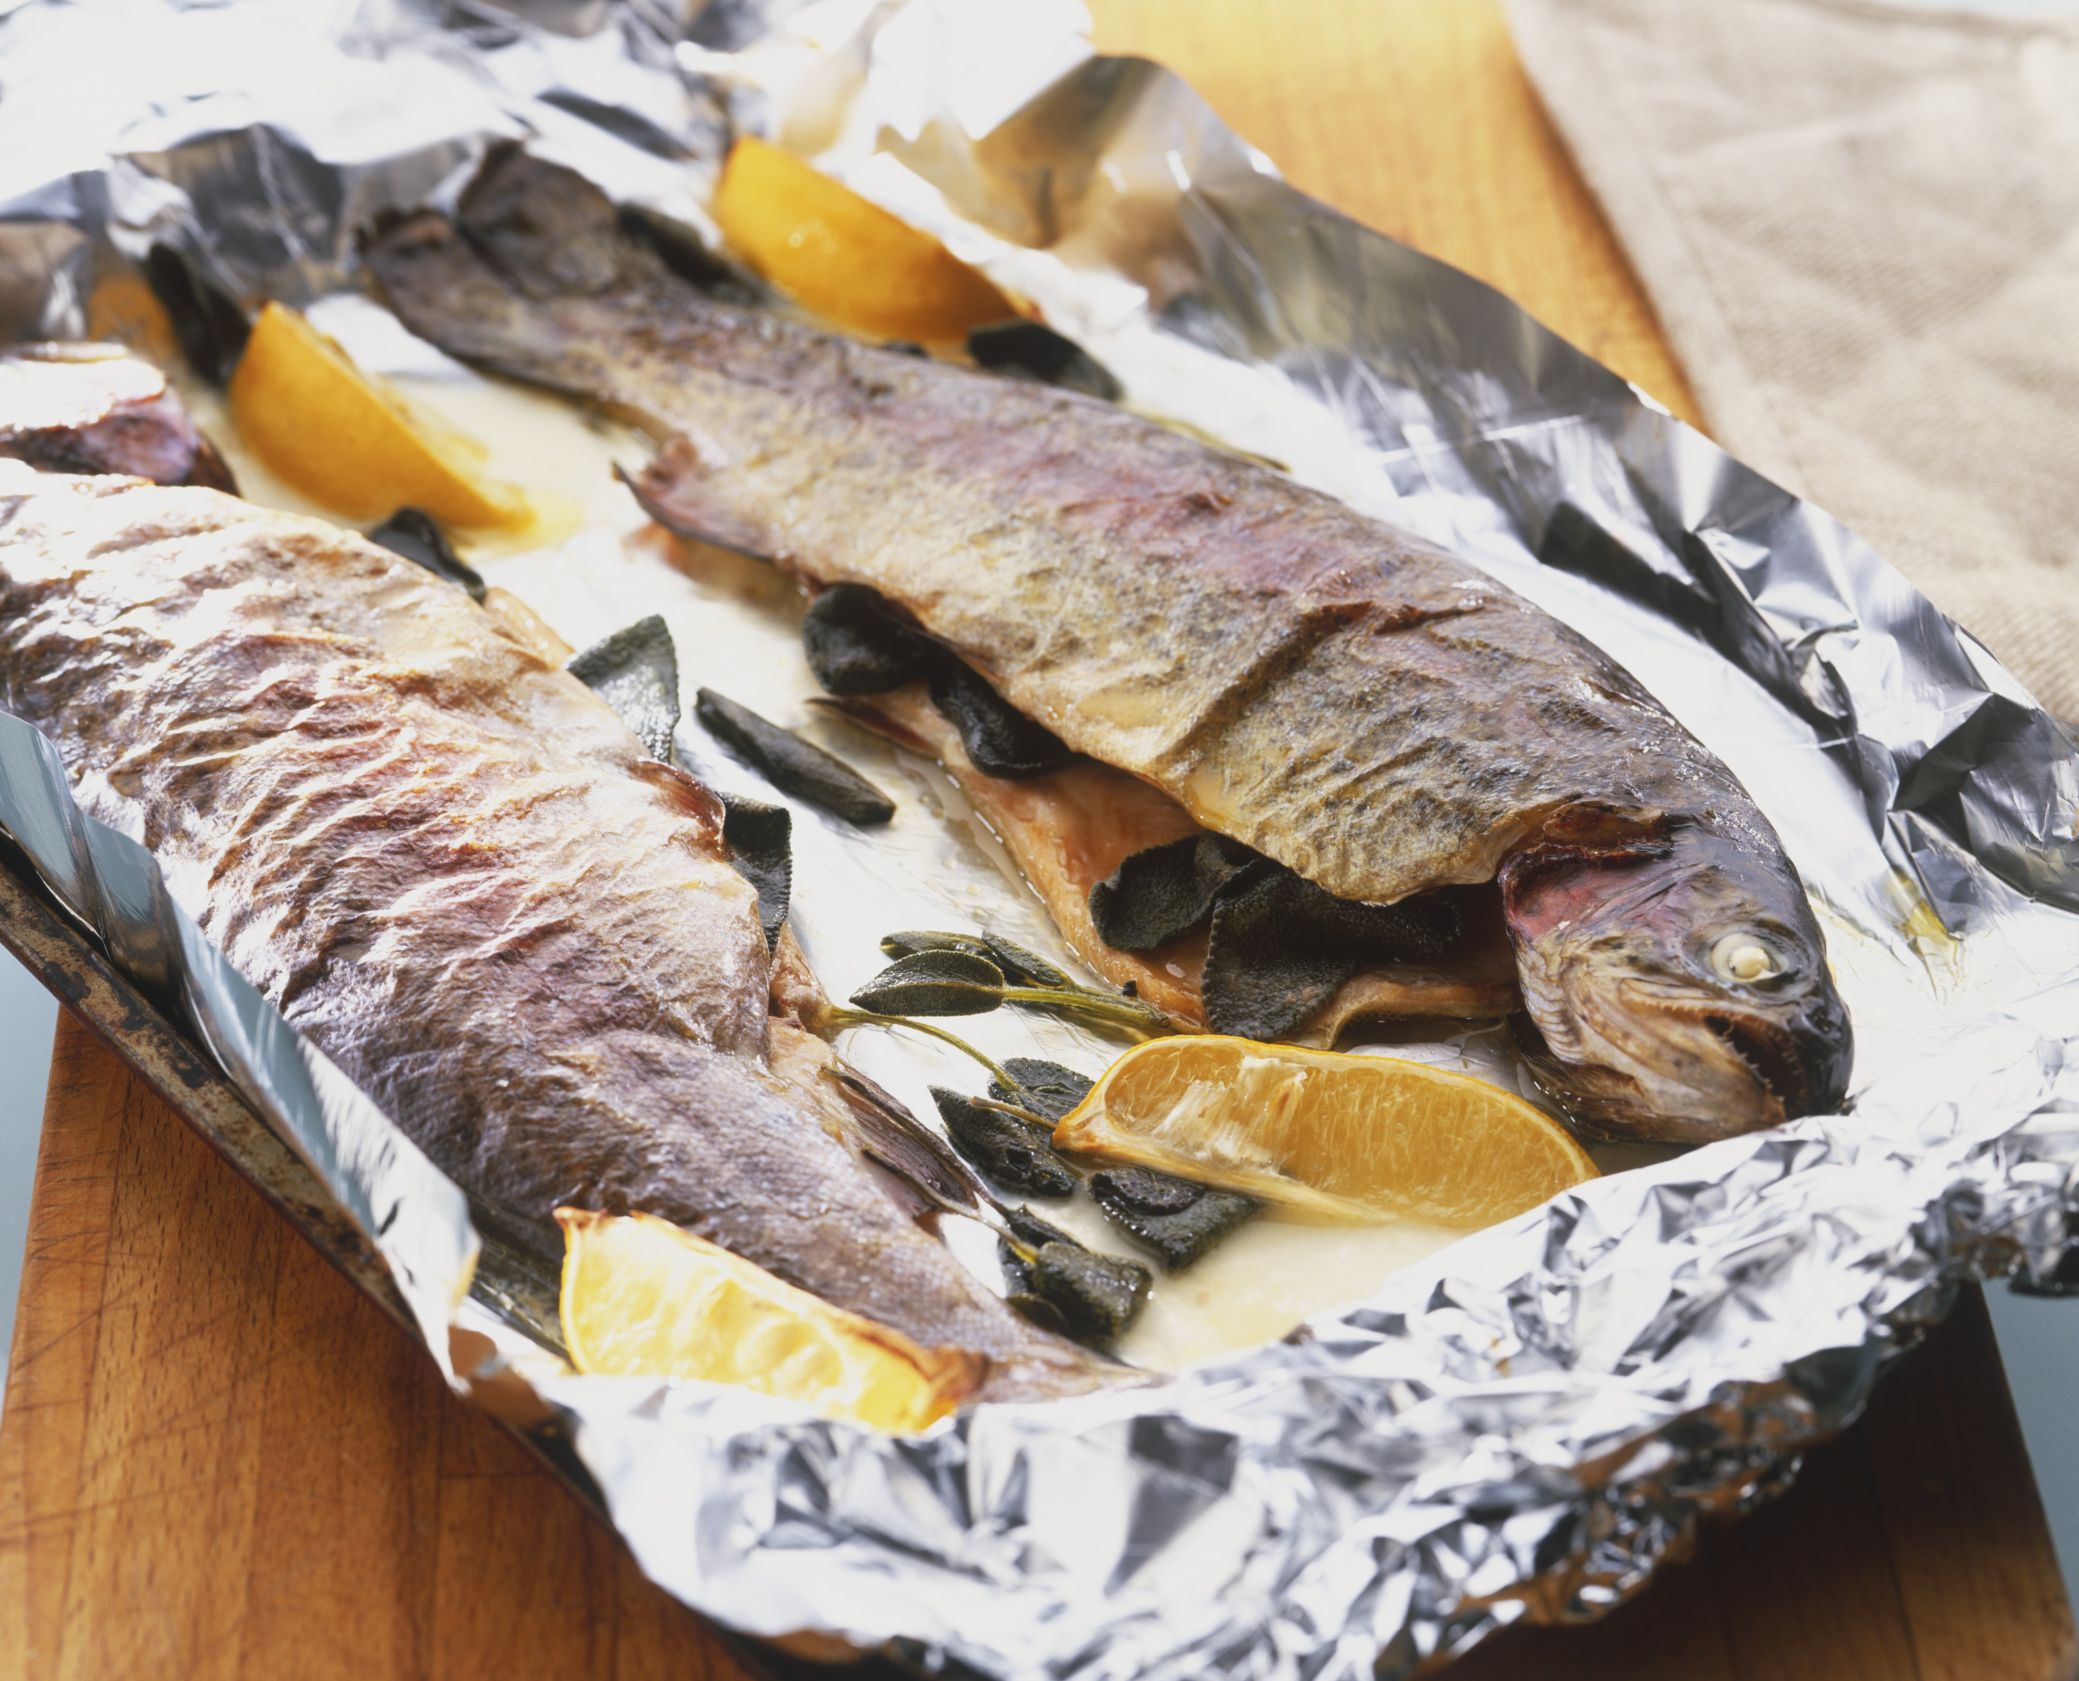 Baked Whole Trout Recipe With Lemon And Dill - GettyImages 72891680 56a4998c5f9b58b7D0D7bD22